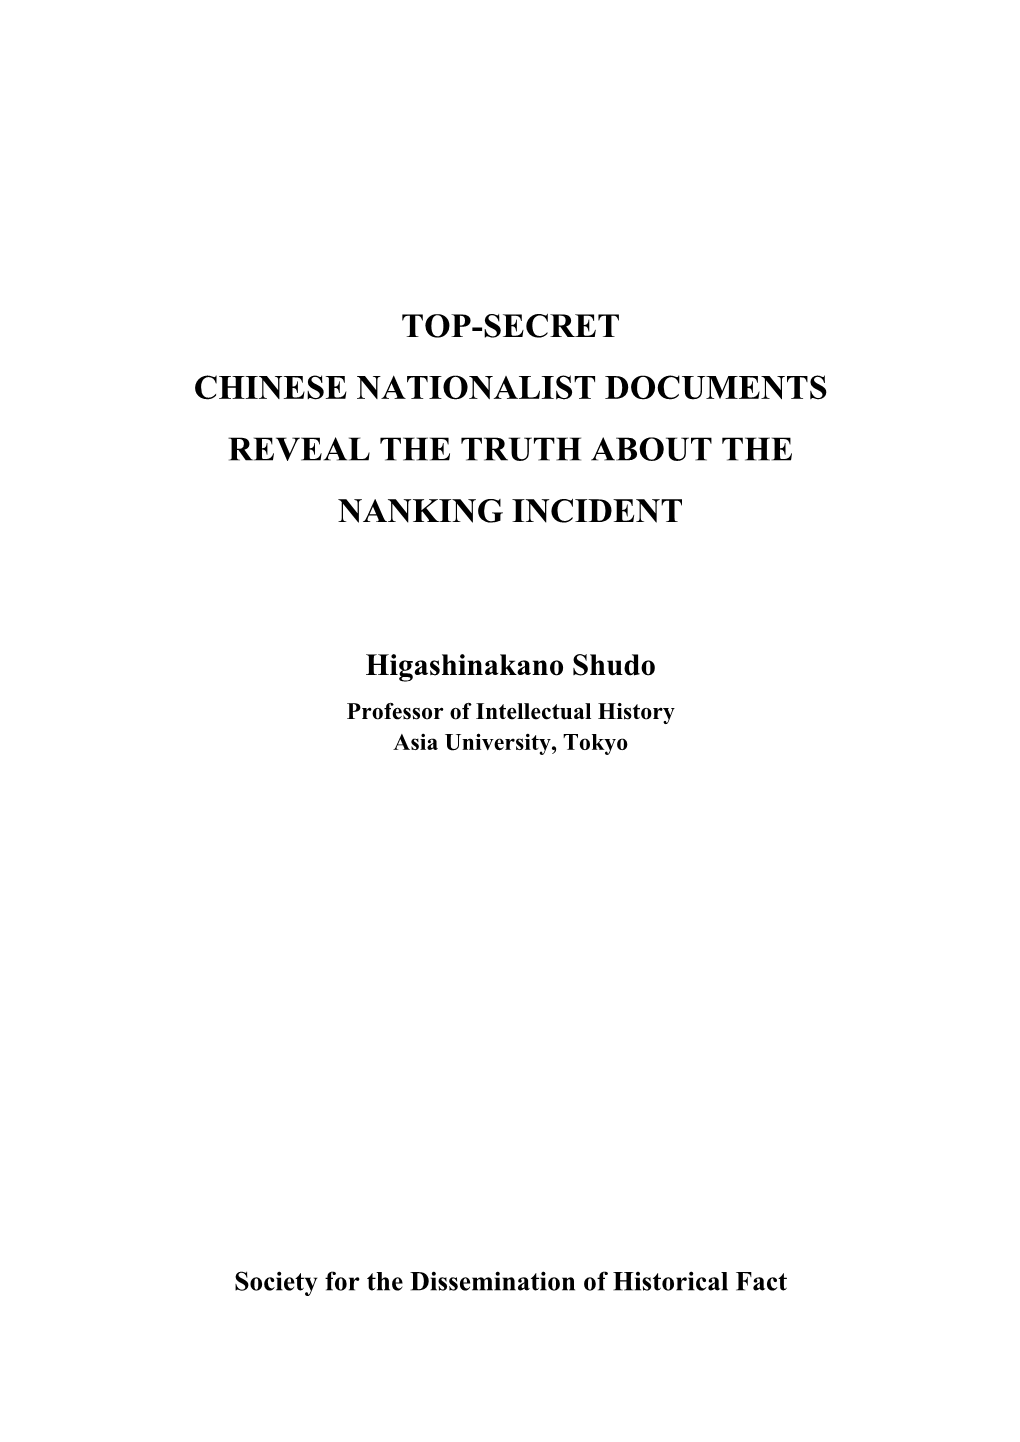 Top-Secret Chinese Nationalist Documents Reveal the Truth About the Nanking Incident